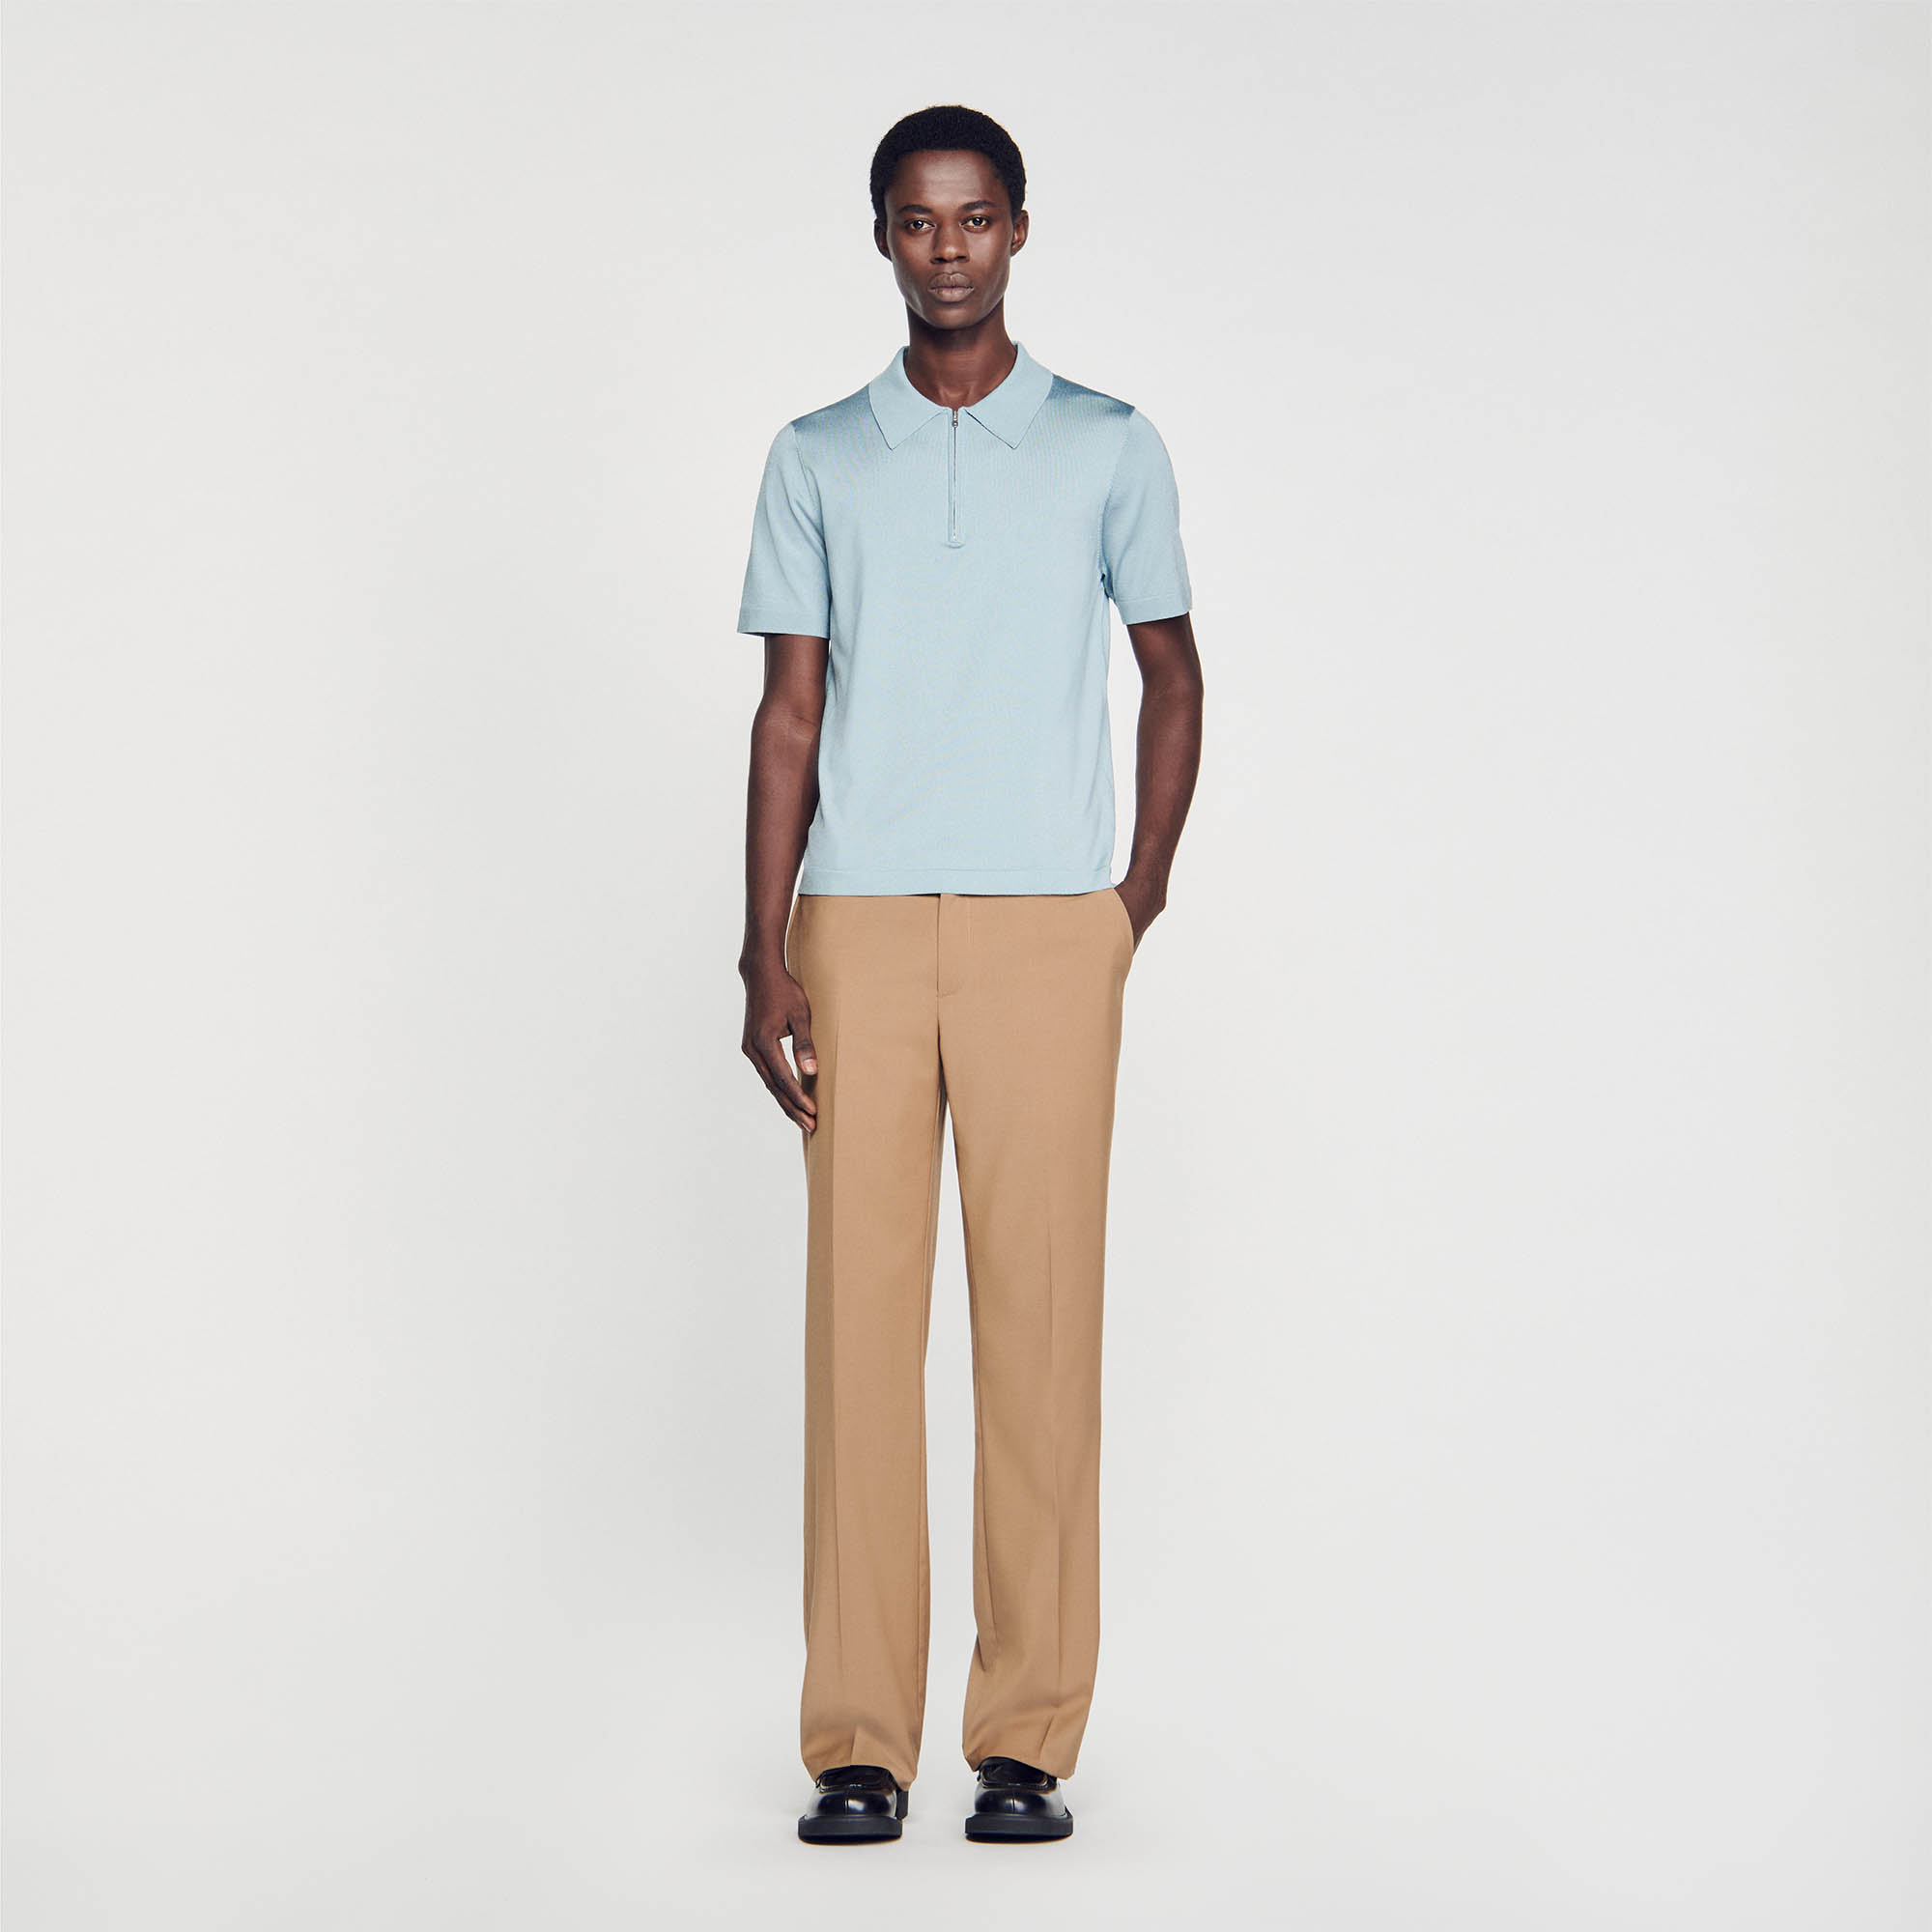 Sandro acetate Knitted polo shirt with a zip-up shirt collar and short sleeves